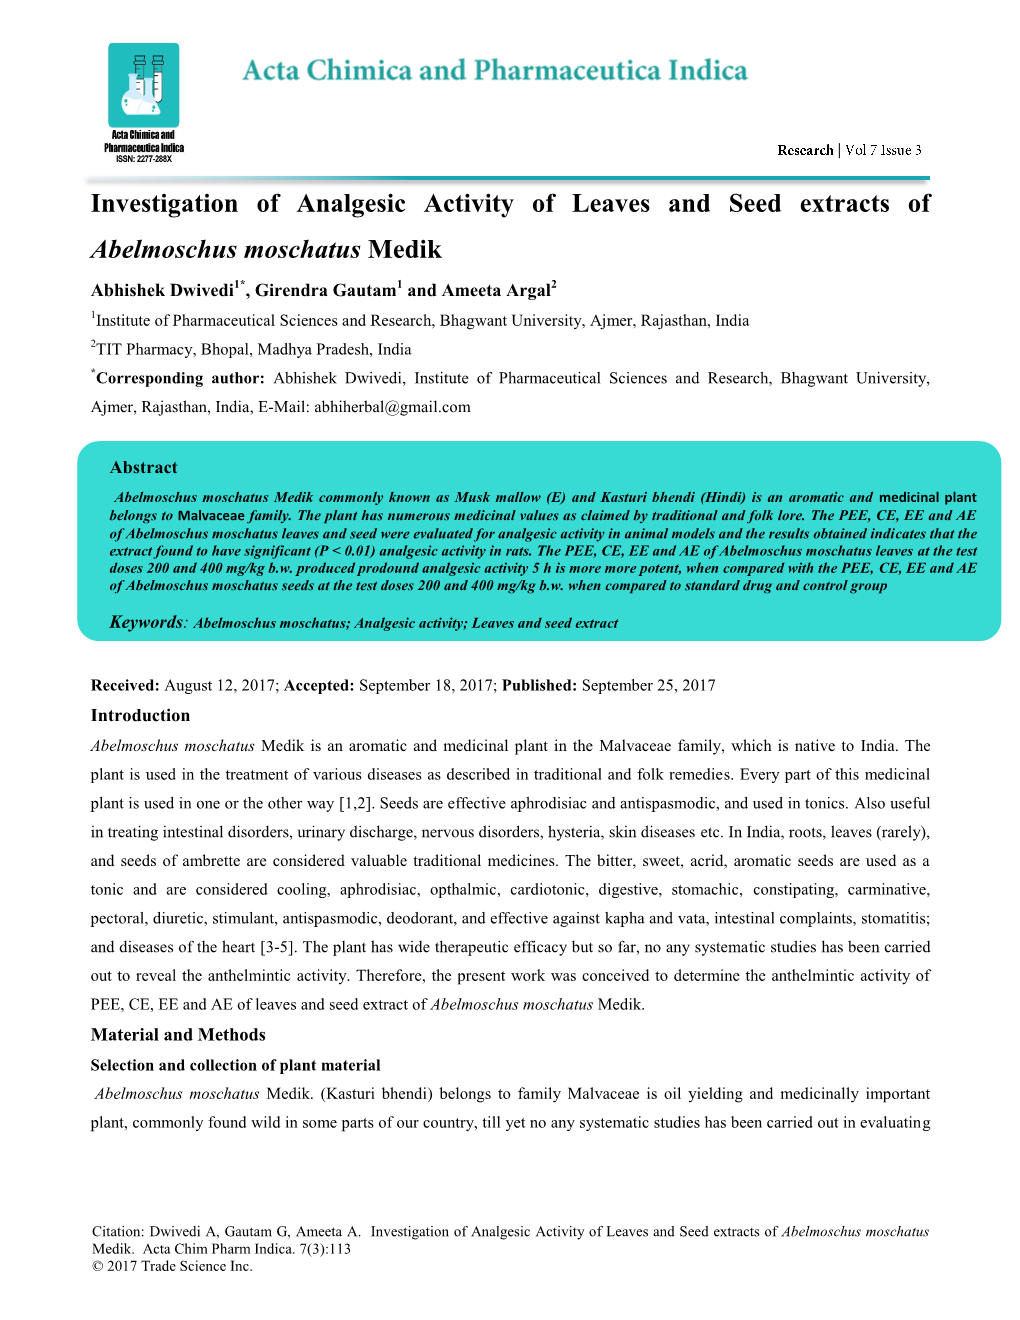 Investigation of Analgesic Activity of Leaves and Seed Extracts Of